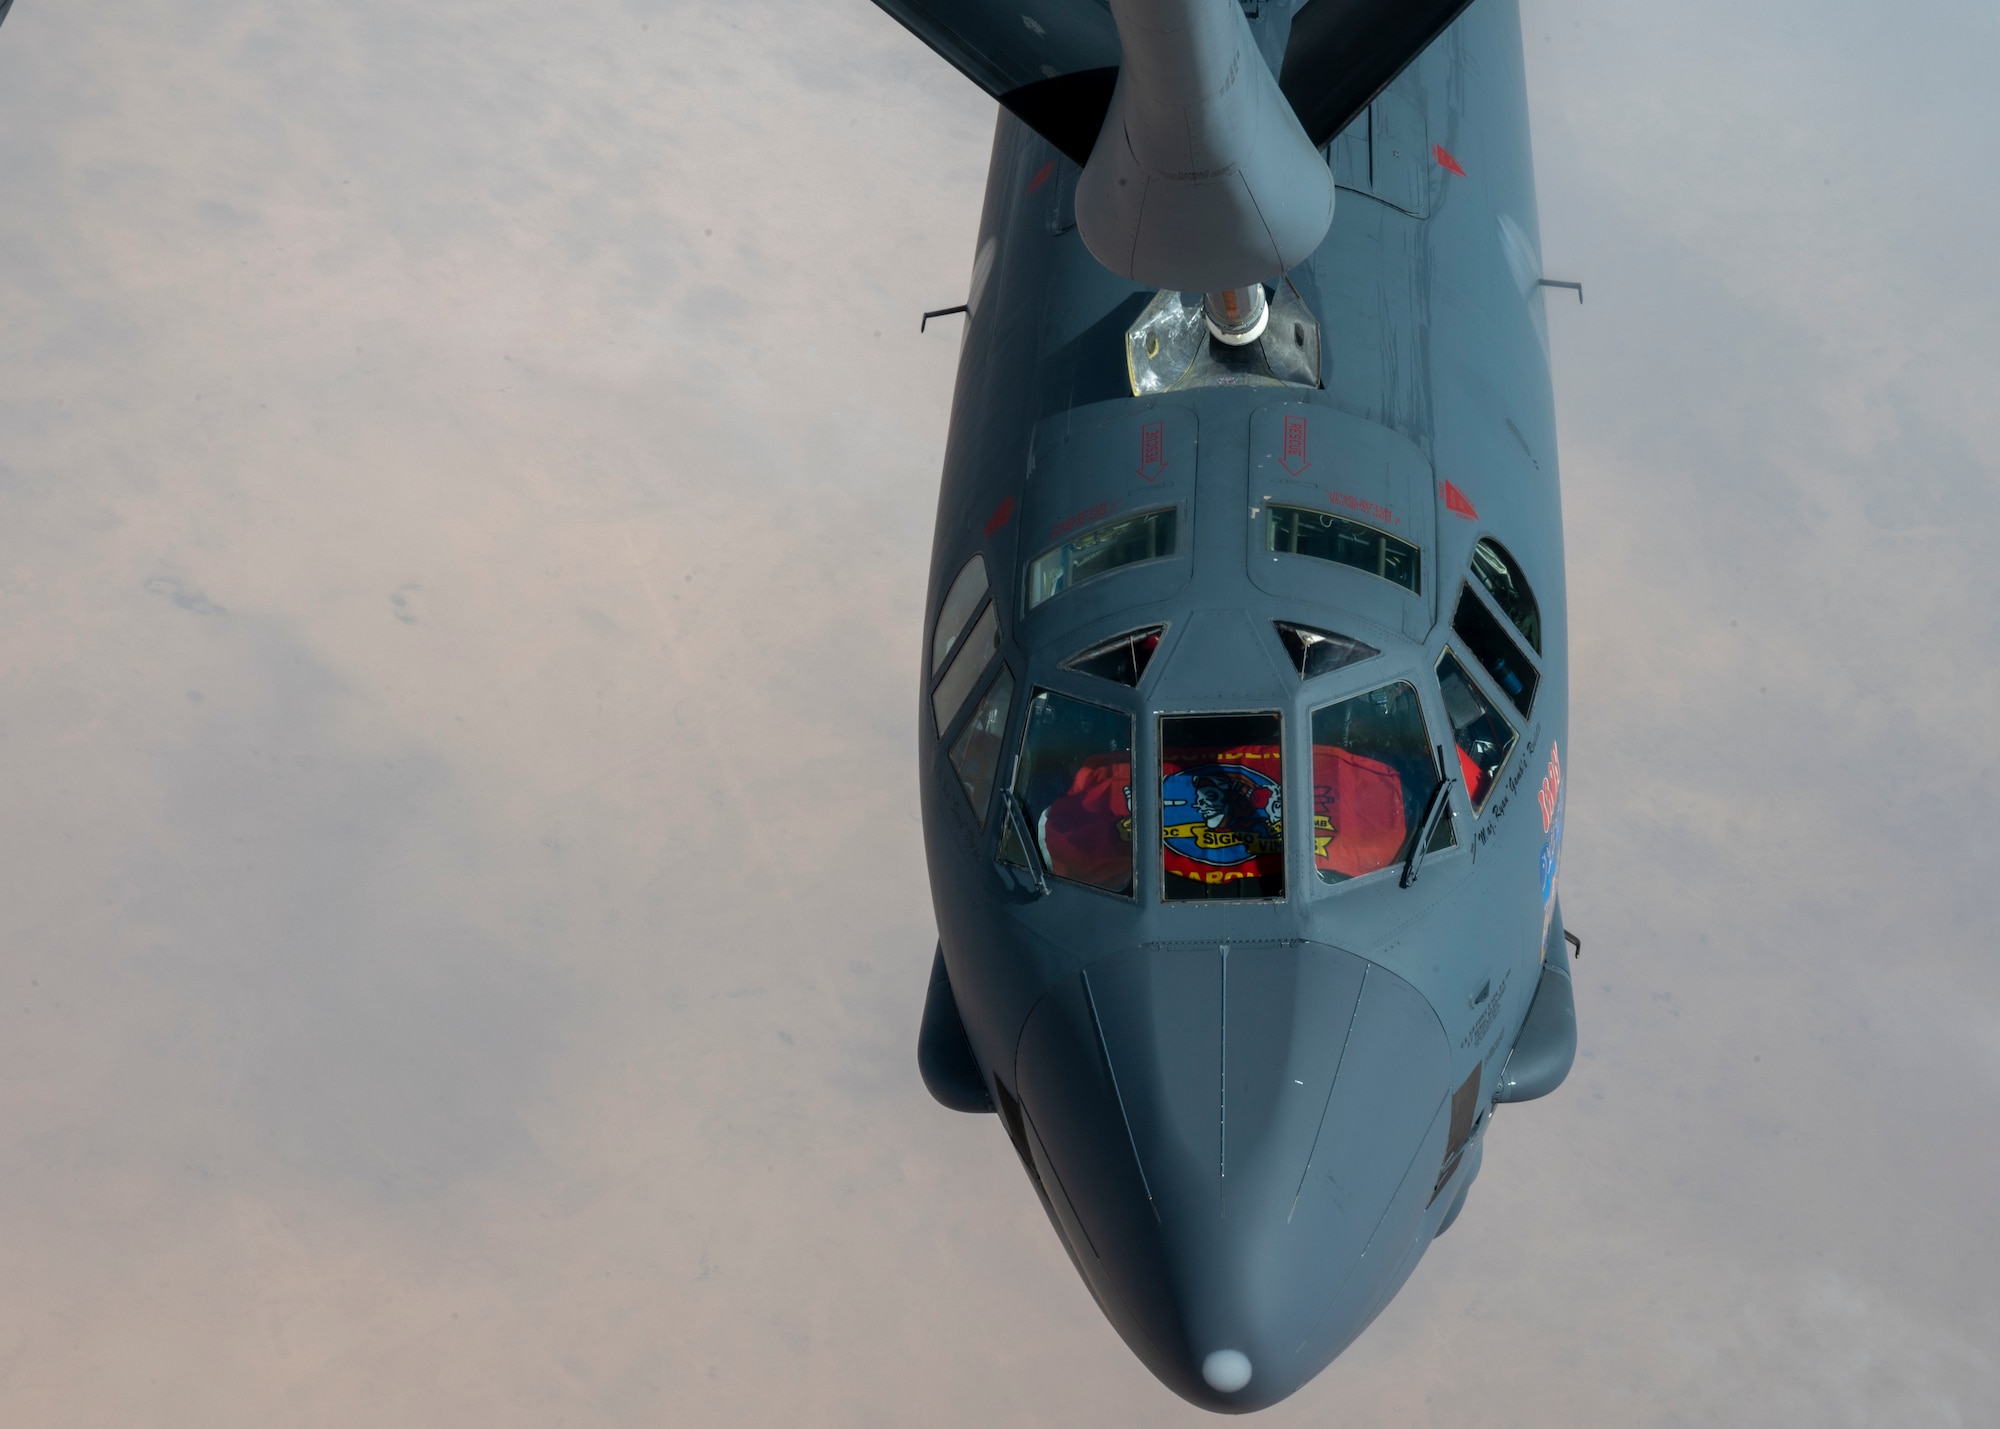 A U.S. Air Force B-52H Stratofortress assigned to the 23rd Bomb Squadron, refuels with a KC-135 Stratotanker assigned to the 91st Expeditionary Air Refueling Squadron in the U.S. Central Command area of responsibility during a Bomber Task Force mission, March 12, 2023. The bomber deployment showcases the U.S. and partner nation commitment to regional security and demonstrates the capabilities of a short-notice, rapid deployment of assets. The B-52 is a long-range, heavy bomber capable of carrying a 70,000 pound payload and flying long distances without refuel, providing the U.S., coalition and partner forces with global strike capability to deter conflict while credibly demonstrating the U.S.’s ability to address the global security environment. (U.S. Air Force photo by Staff Sgt. Kirby Turbak)